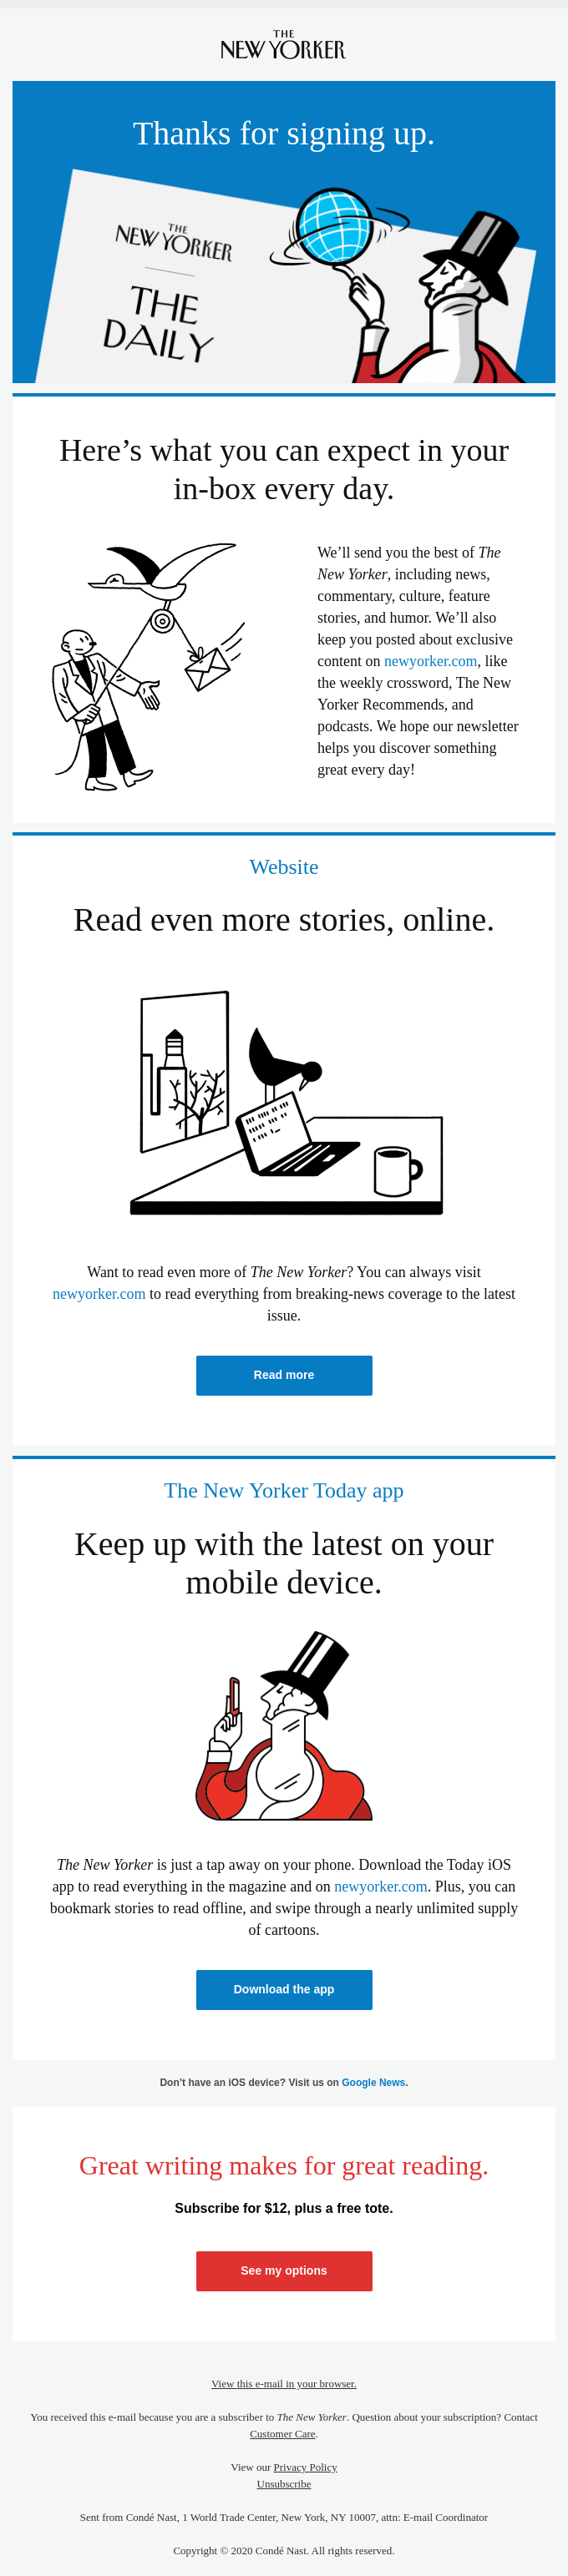 Welcome email from the New Yorker